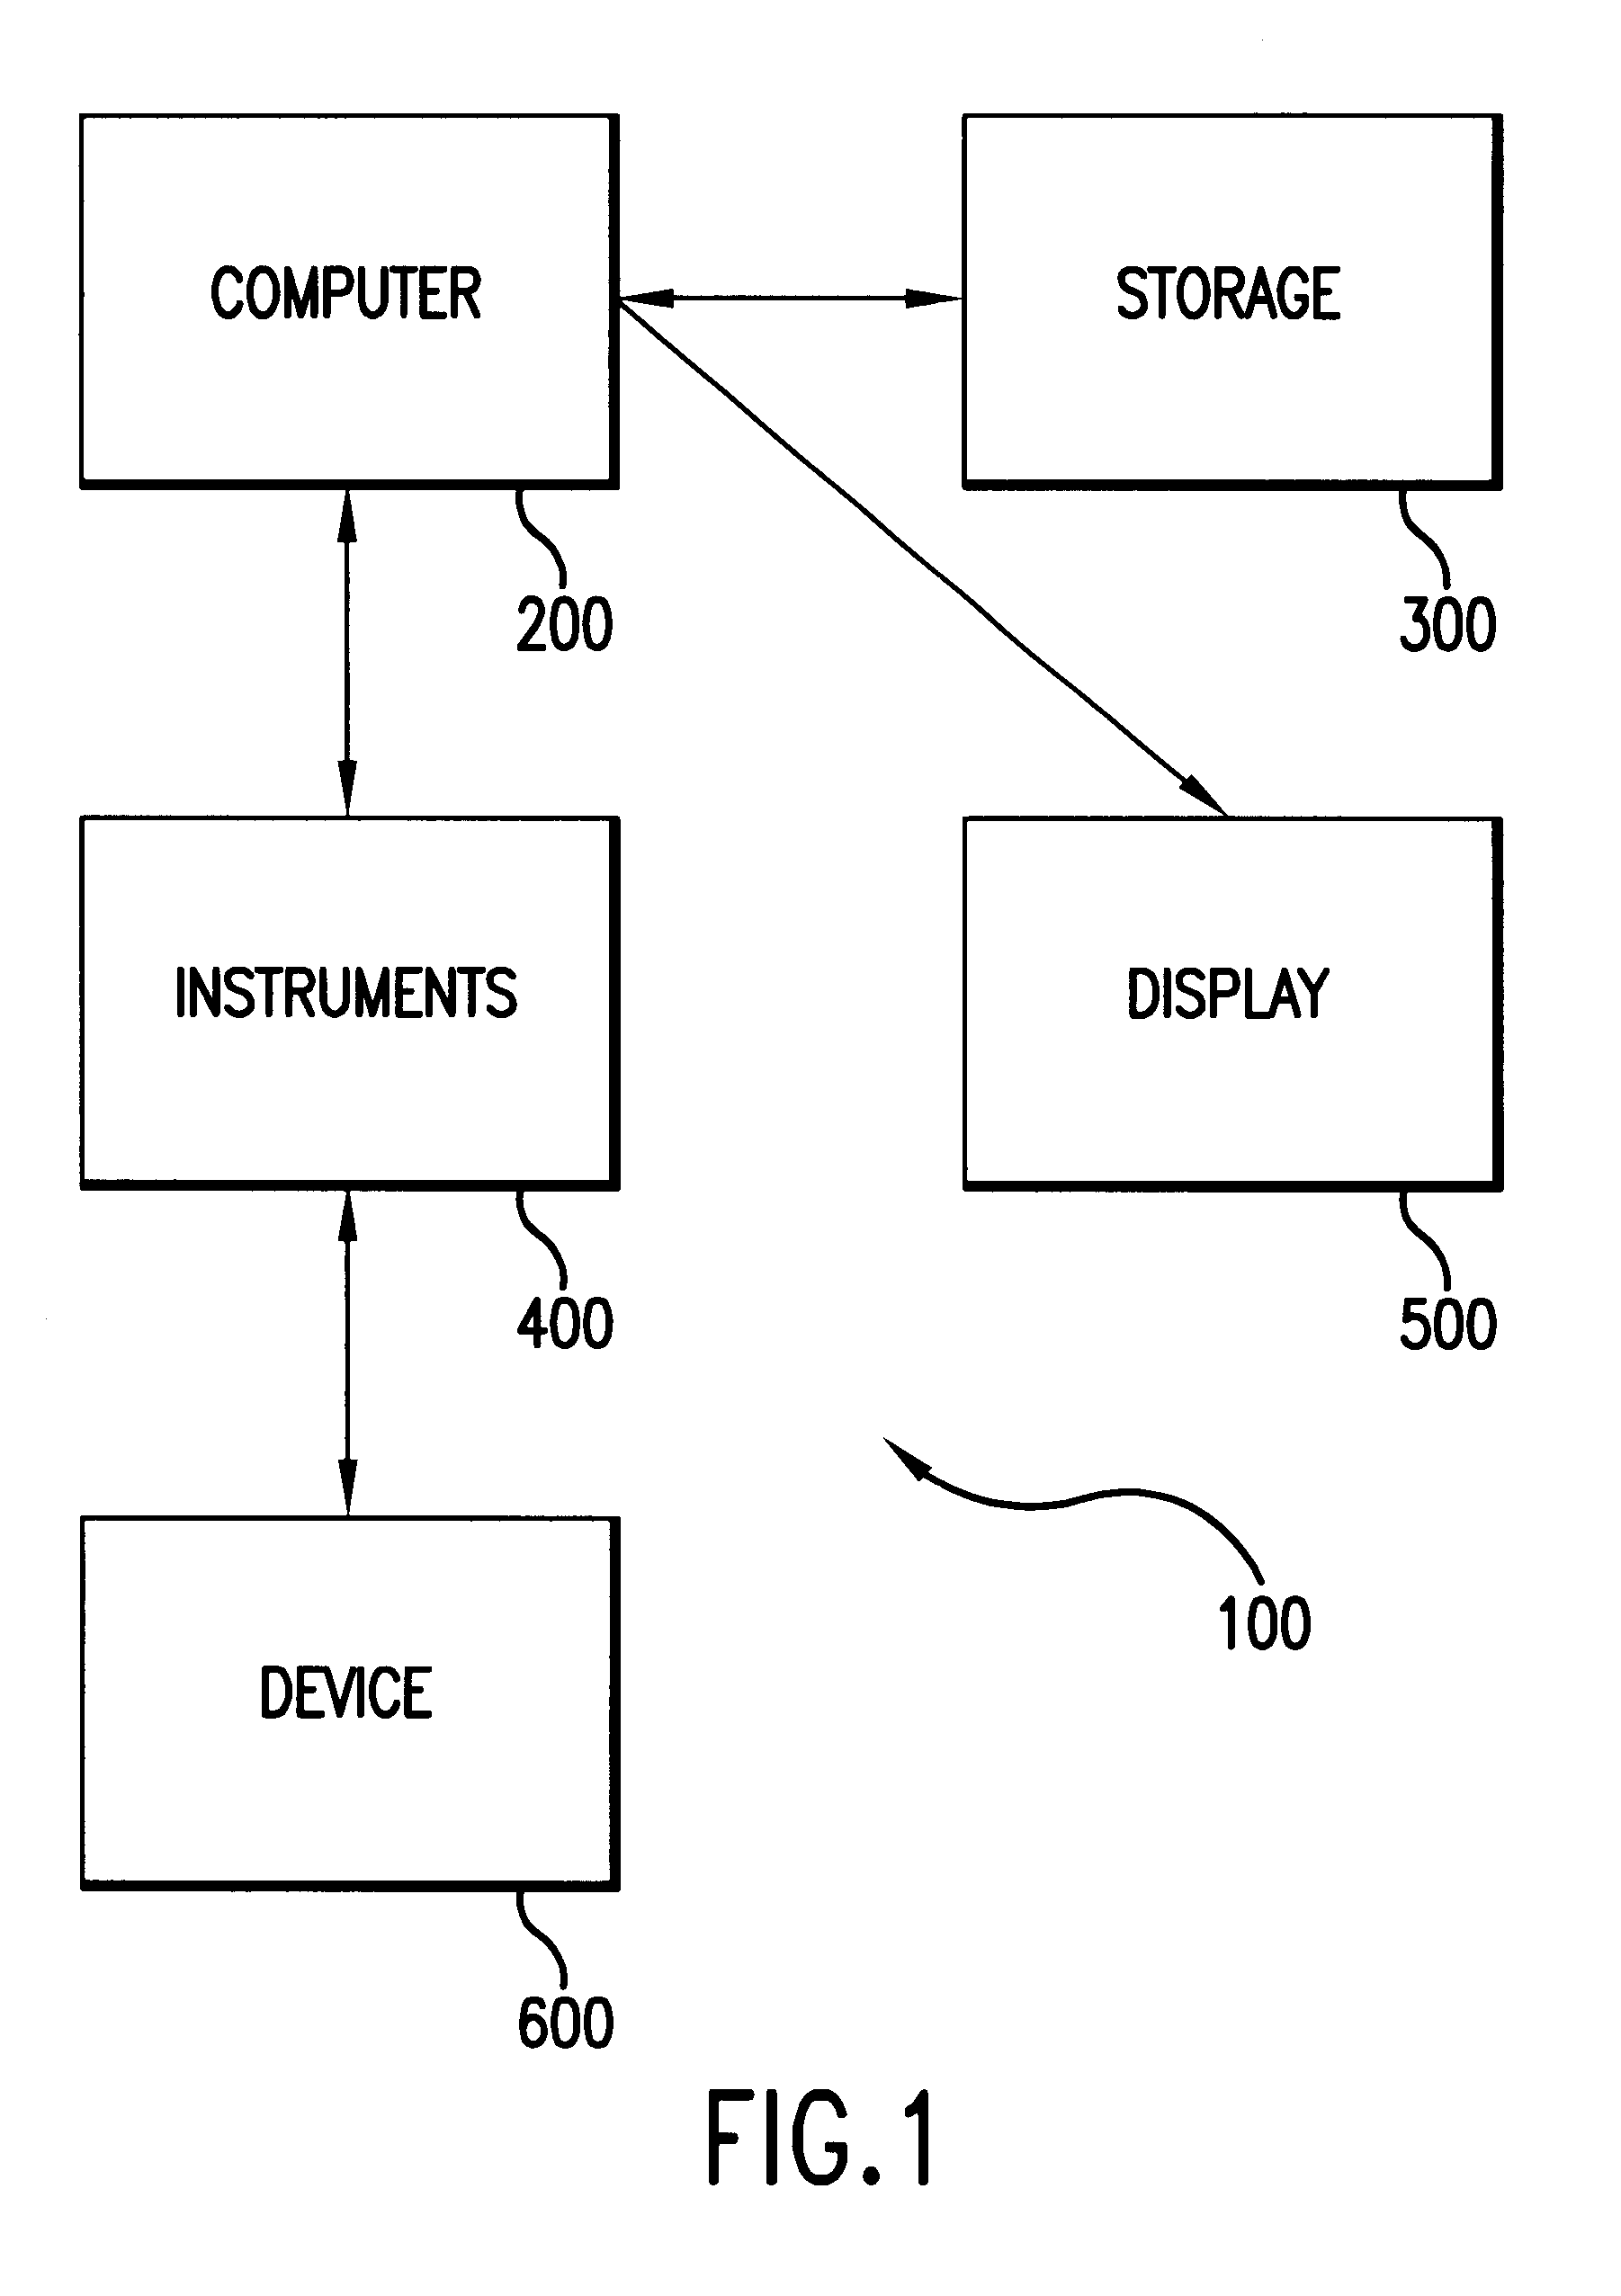 Method for collecting test measurements